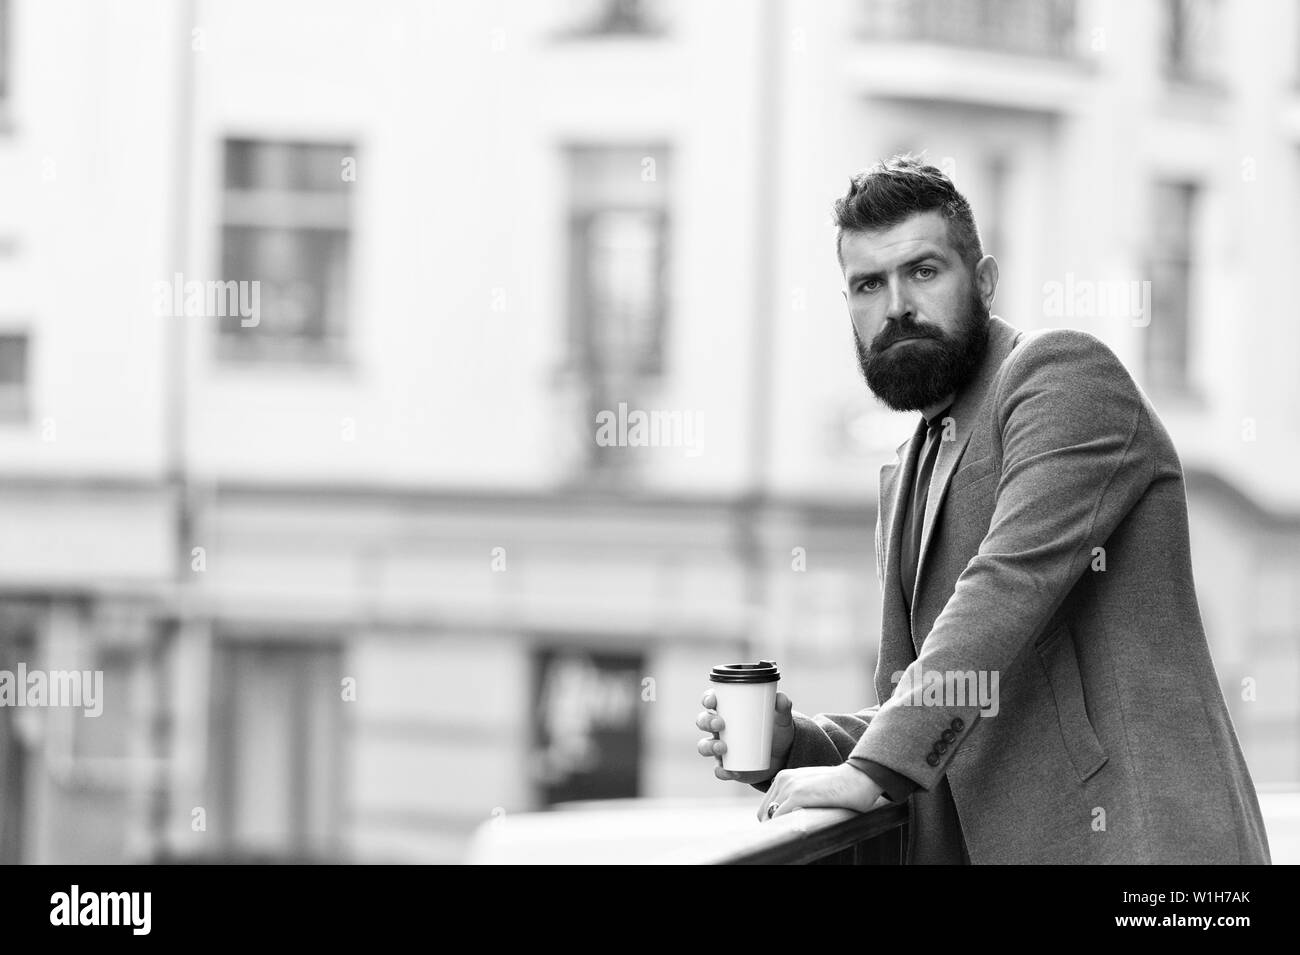 Relax and recharge. Man bearded hipster drinking coffee paper cup. One more sip of coffee. Enjoying coffee on the go. Businessman well groomed appearance enjoy coffee break out of business center. Stock Photo